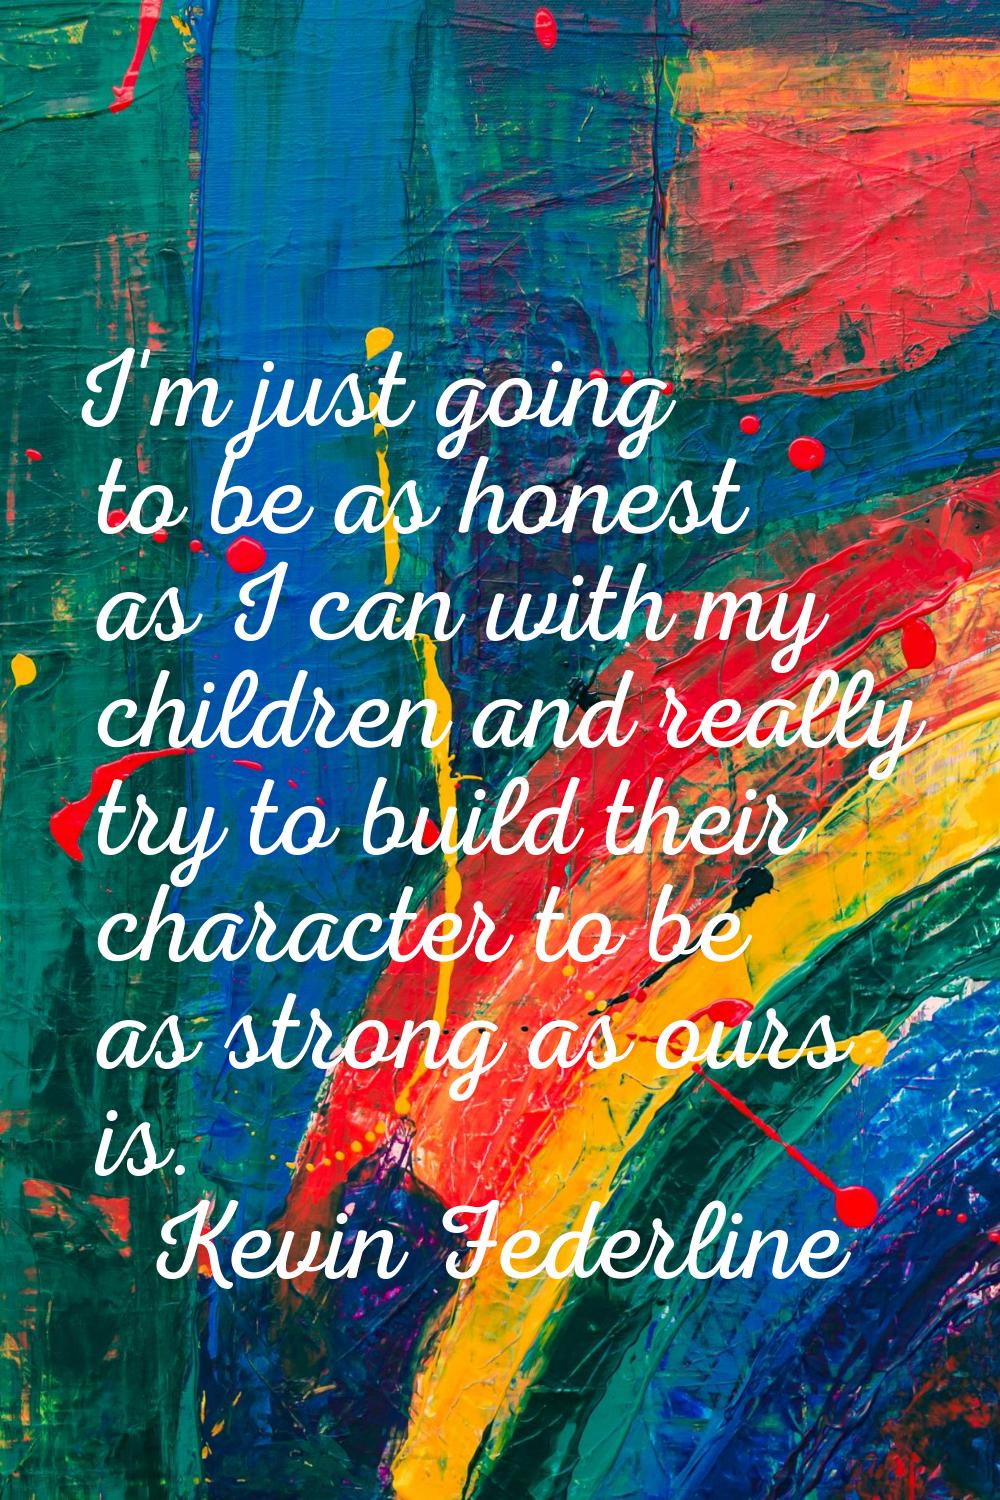 I'm just going to be as honest as I can with my children and really try to build their character to